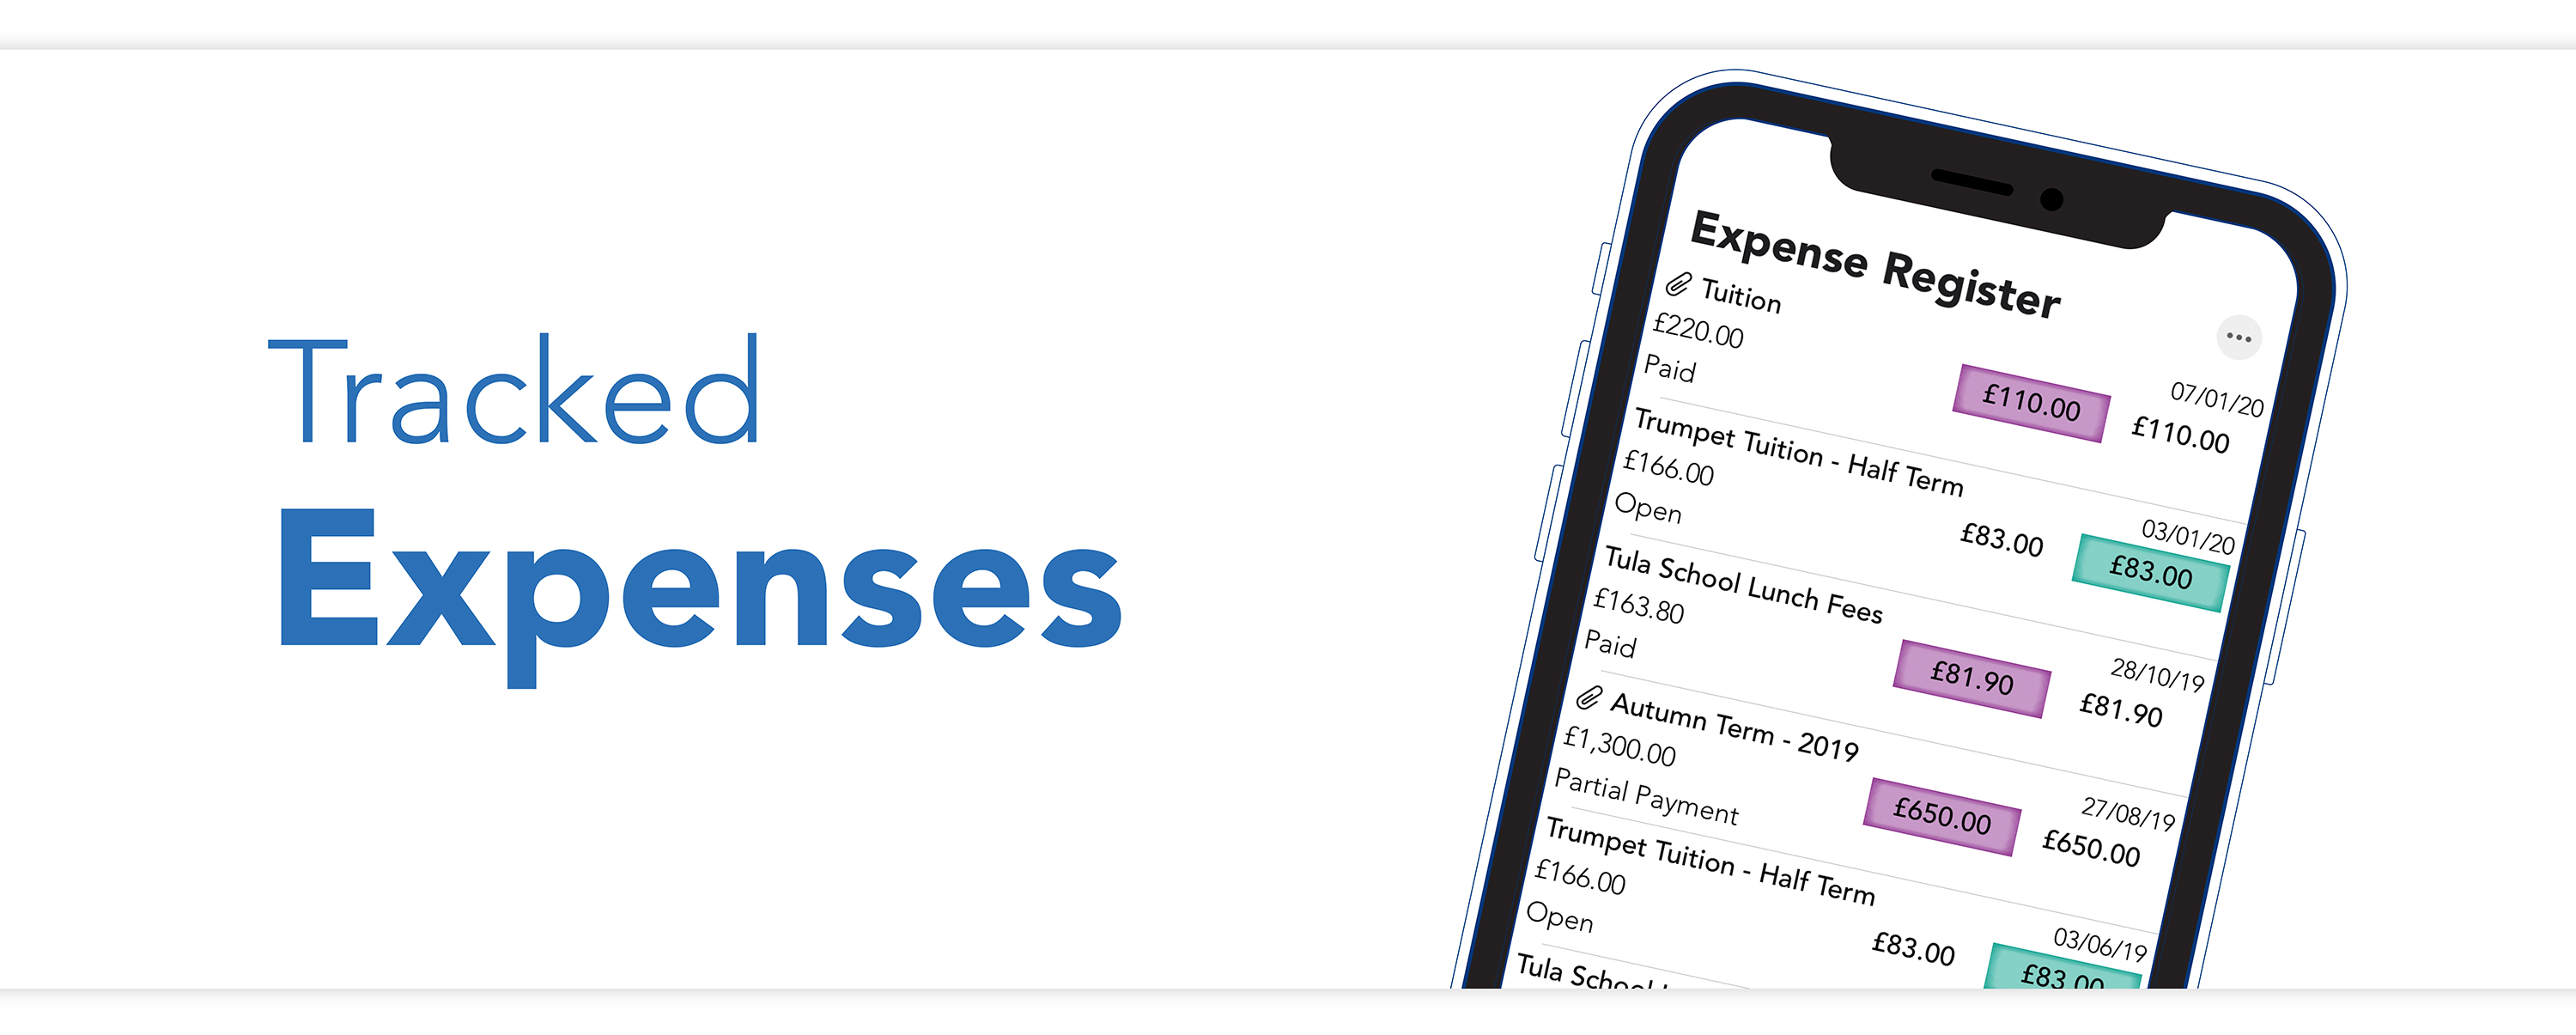 Track expenses, document payments, upload receipts in the expense register on the OFW co-parenting app.